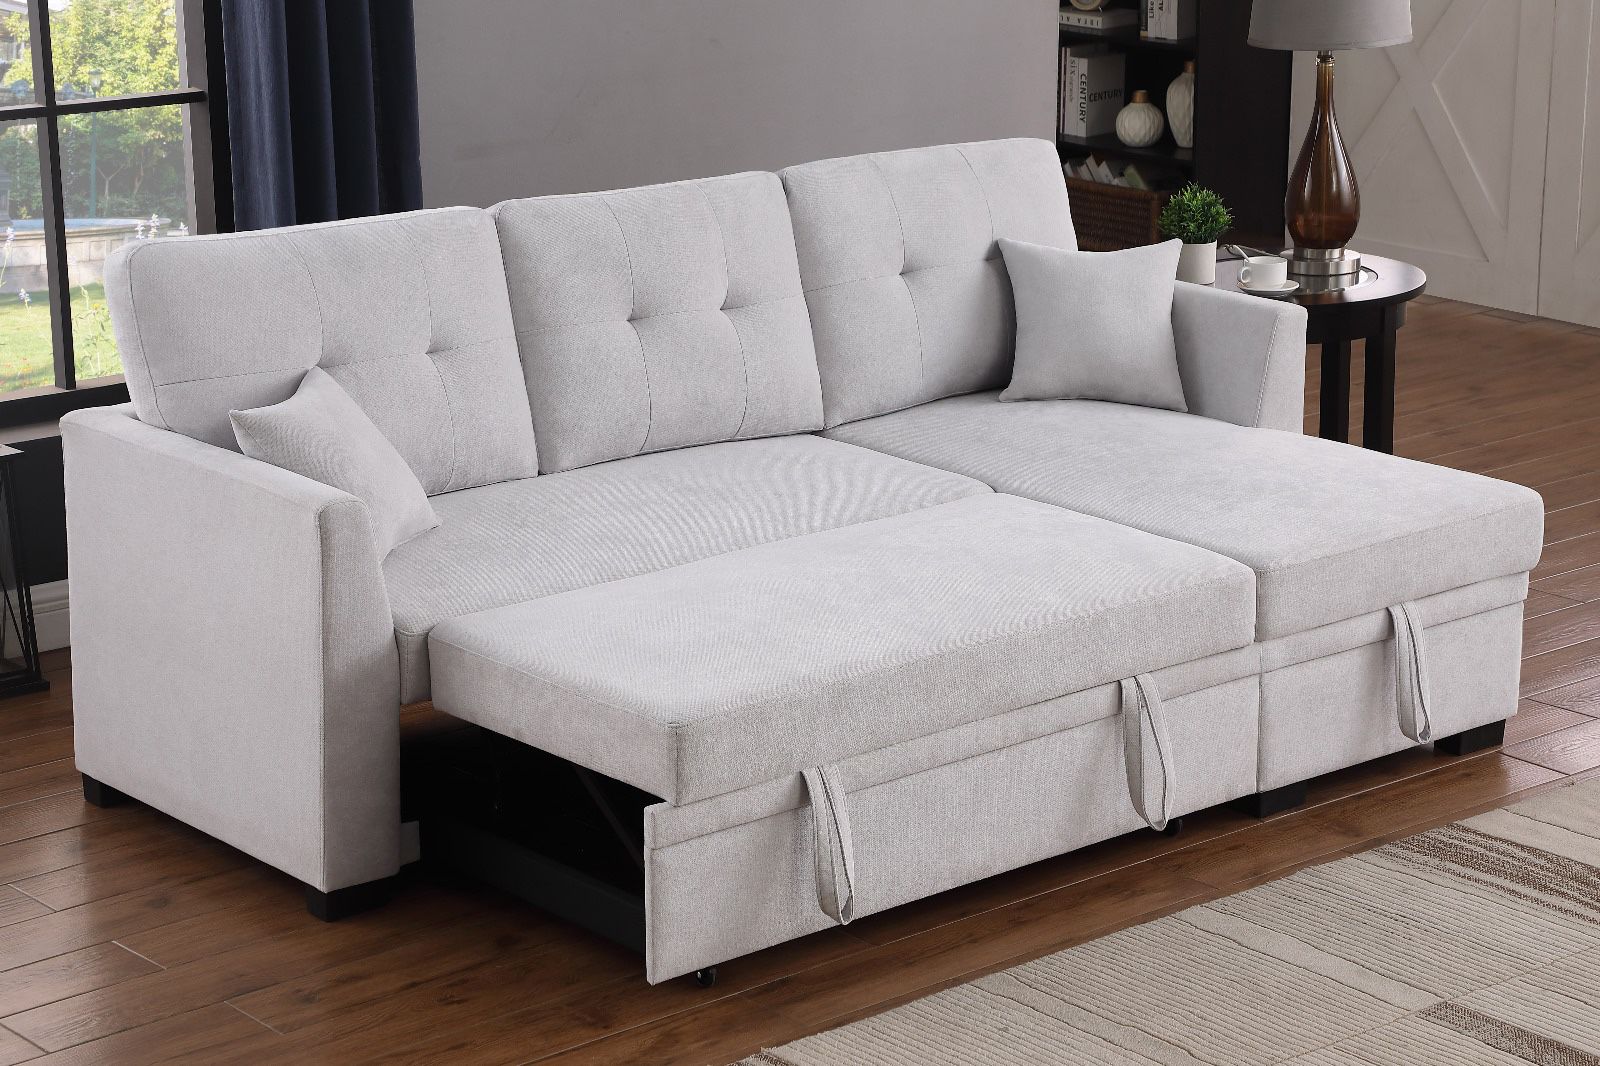 Clearance! Sectional Sofa Bed, Sectional, Sofabed, Sectional Sofa Bed, Sofa With Pull Out Bed, Sectional Couch, Reversible Sectional, Sleeper Sofa